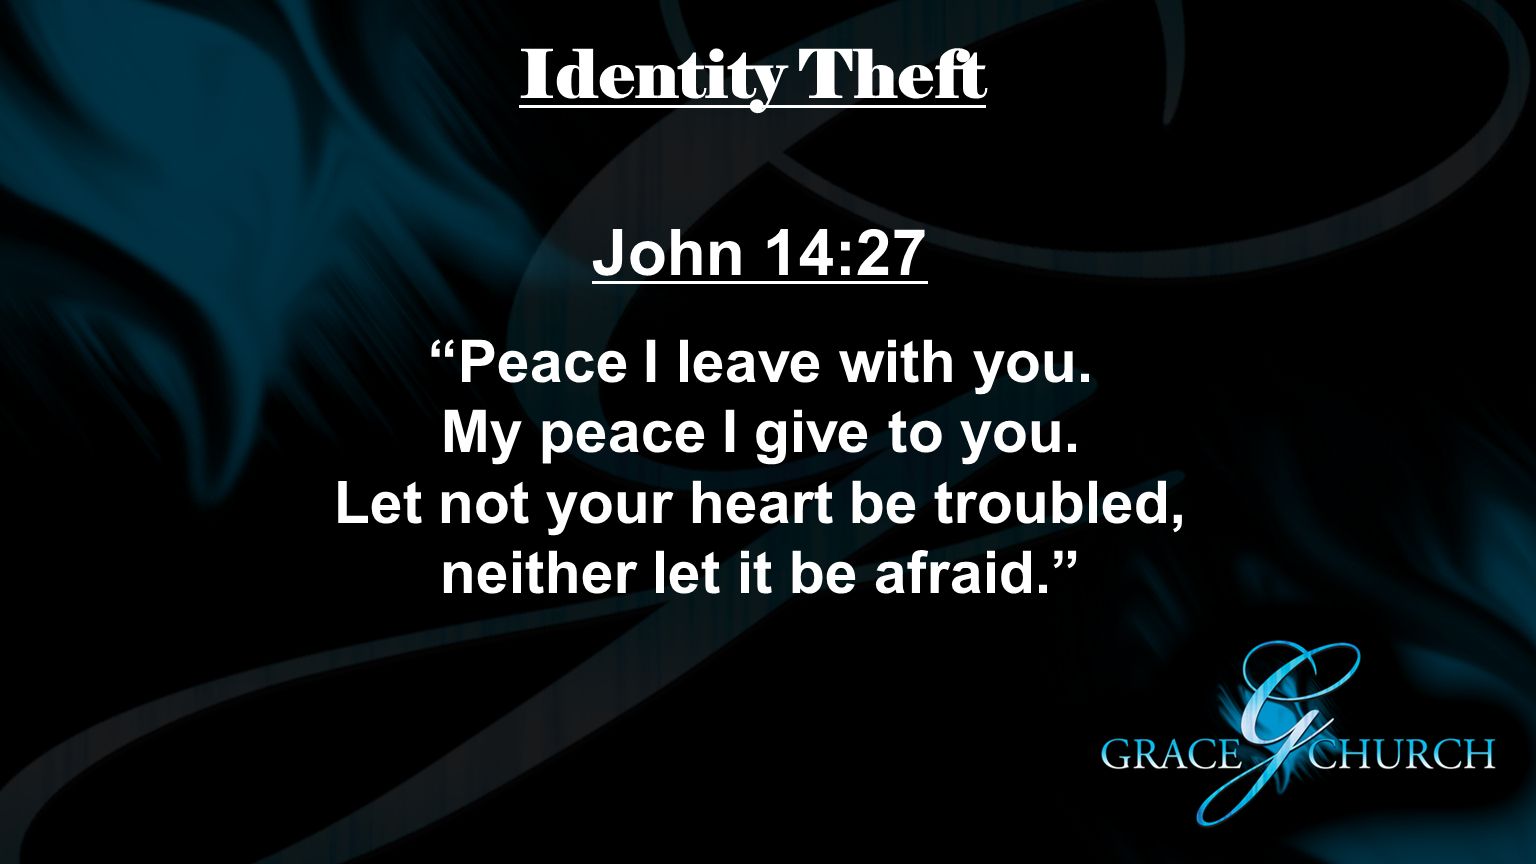 Identity Theft John 14:27. Peace I leave with you.